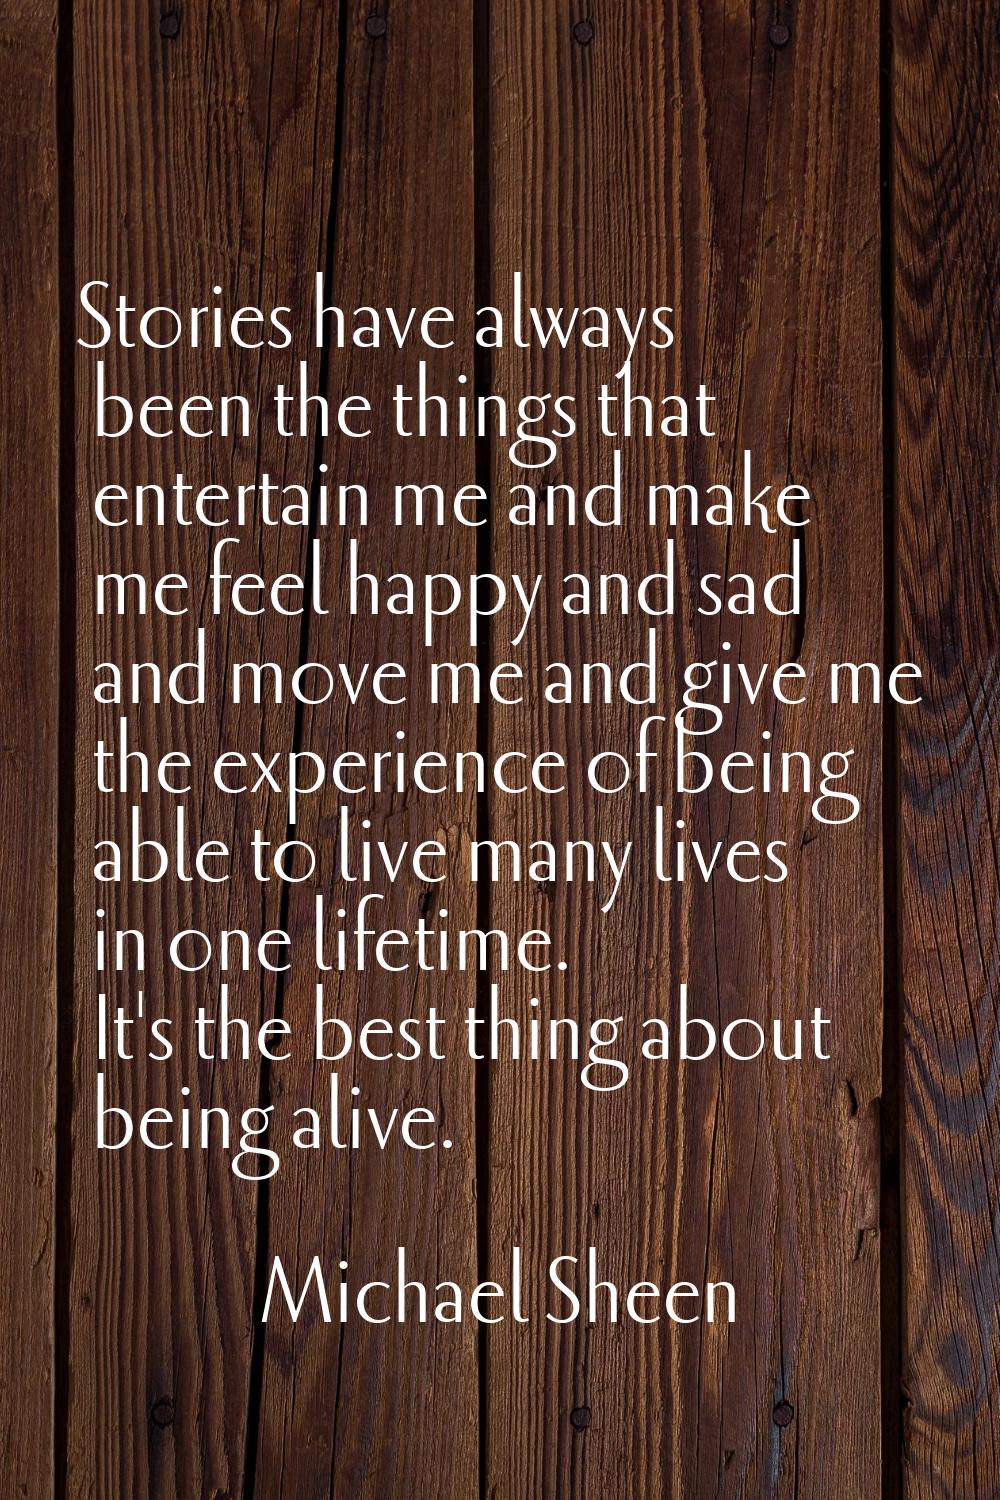 Stories have always been the things that entertain me and make me feel happy and sad and move me an